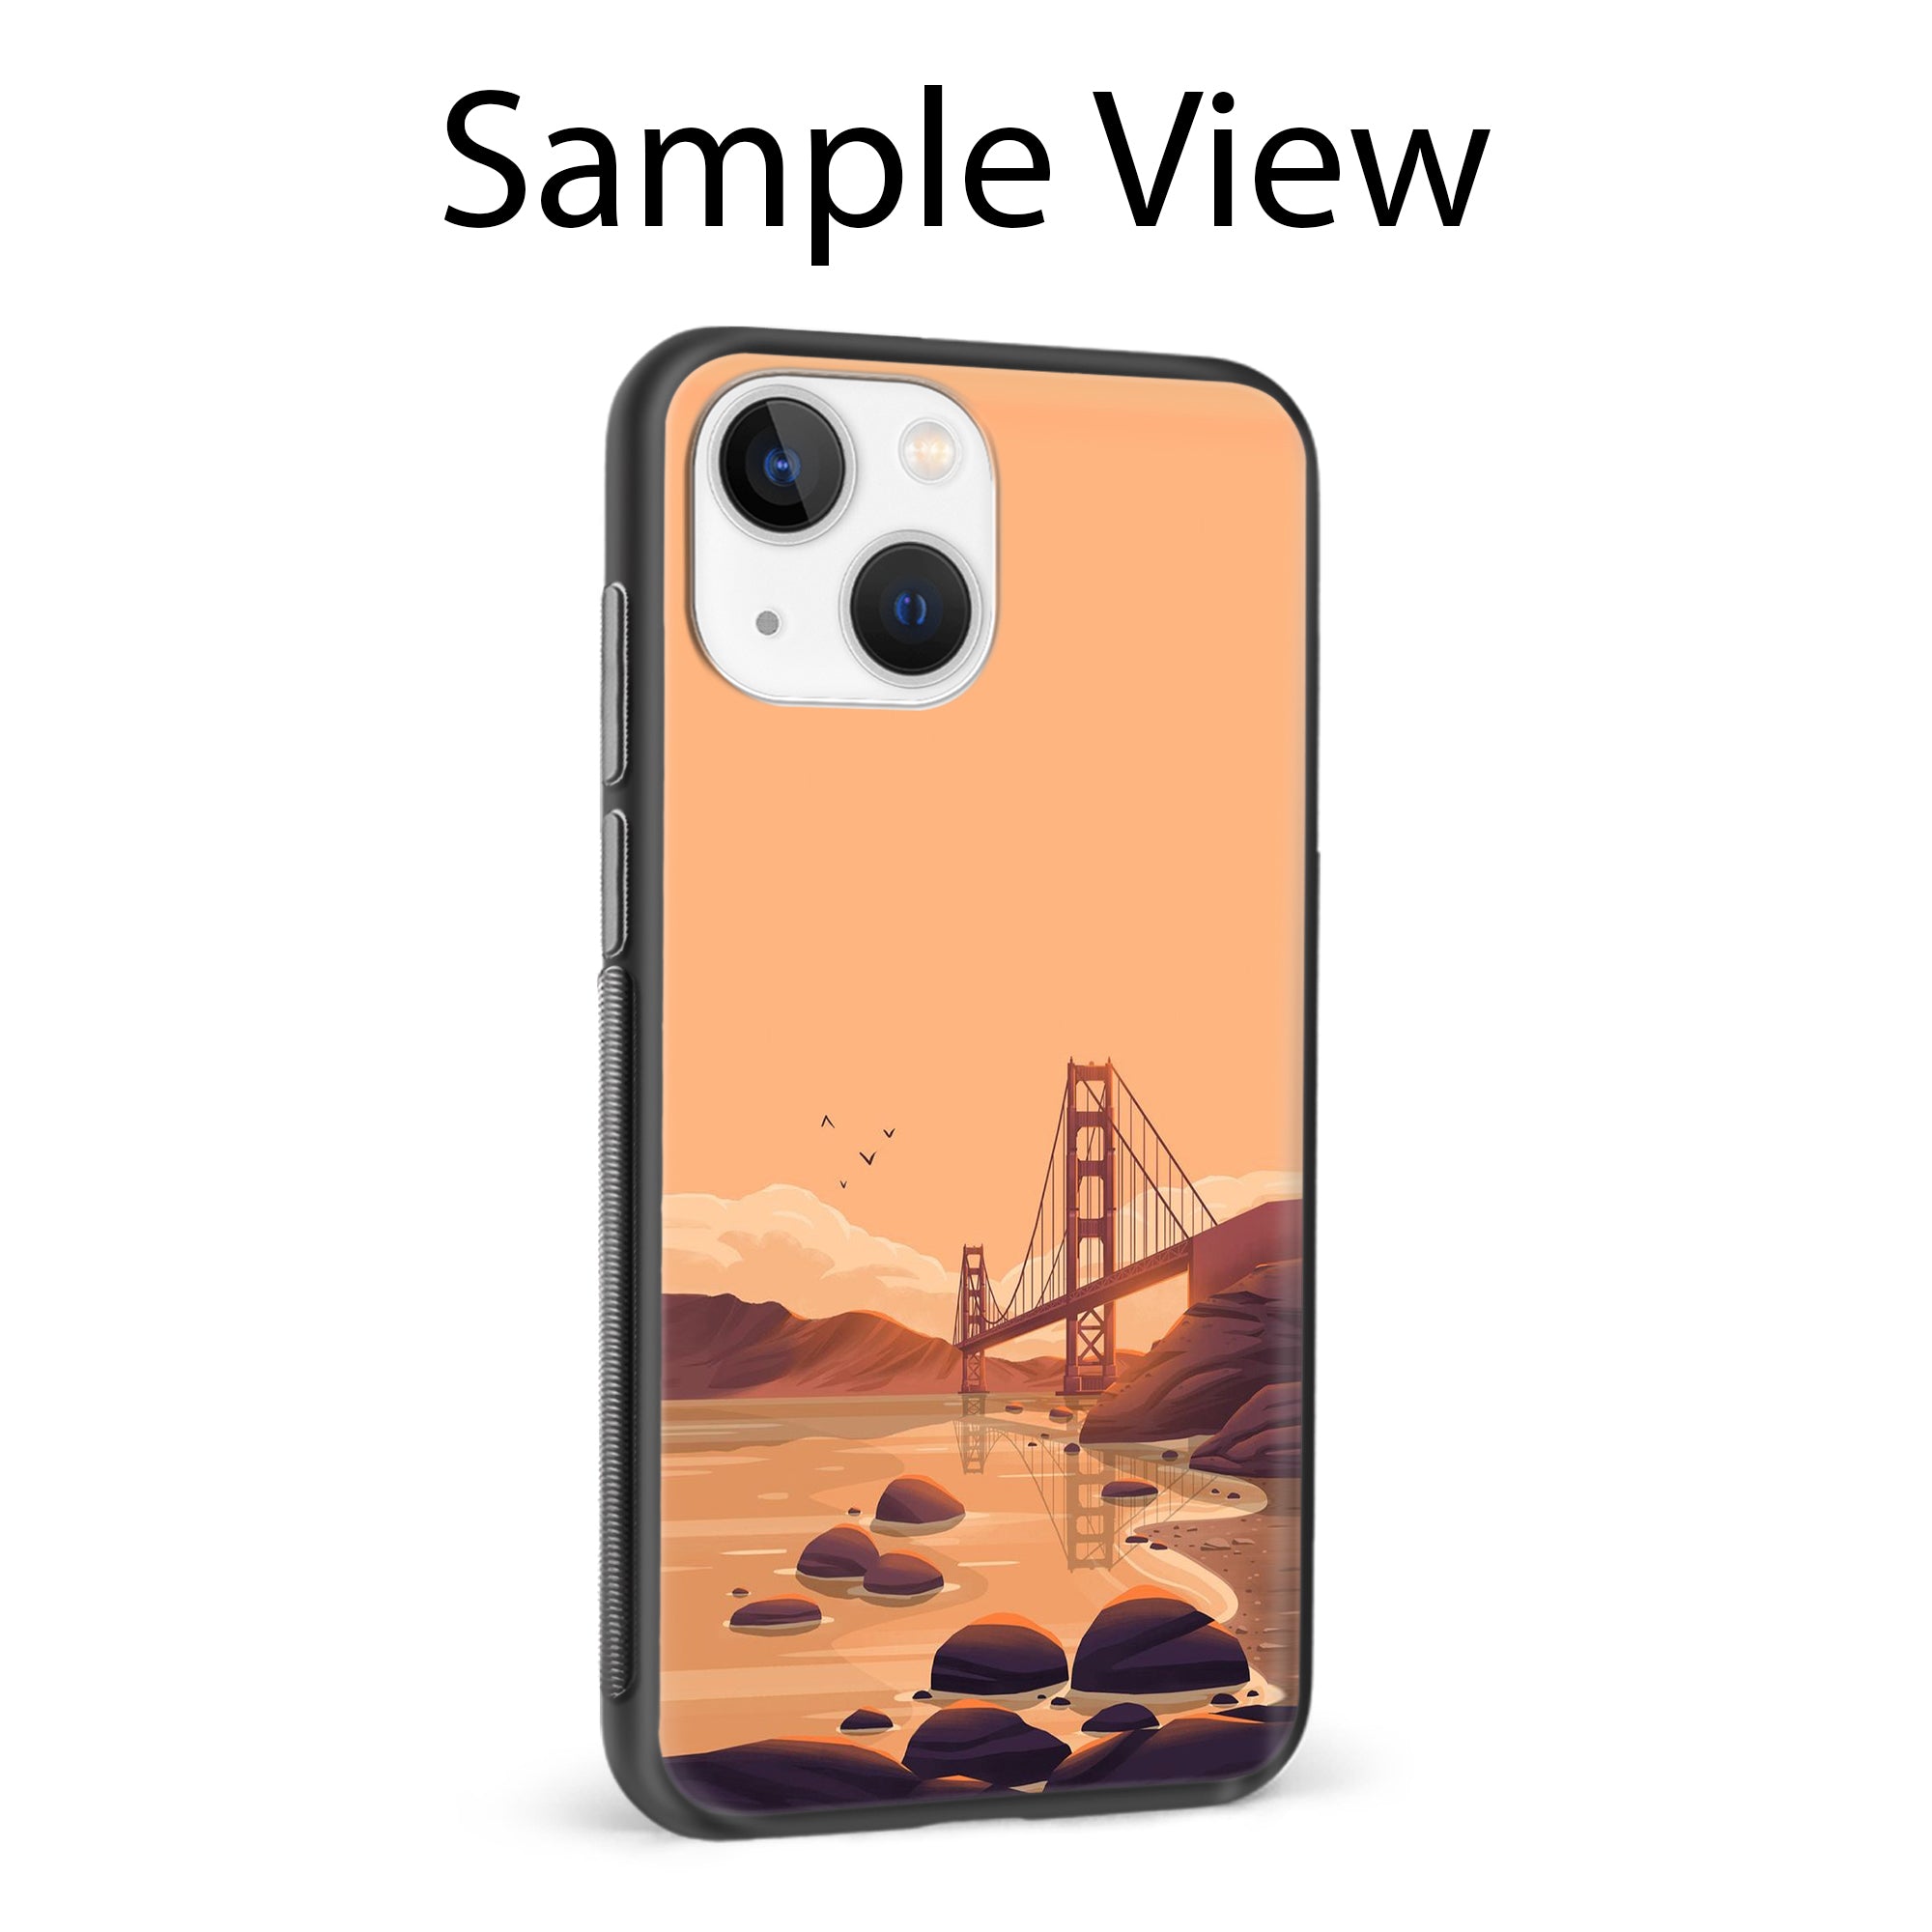 Buy San Francisco Metal-Silicon Back Mobile Phone Case/Cover For Samsung Galaxy M31 Online